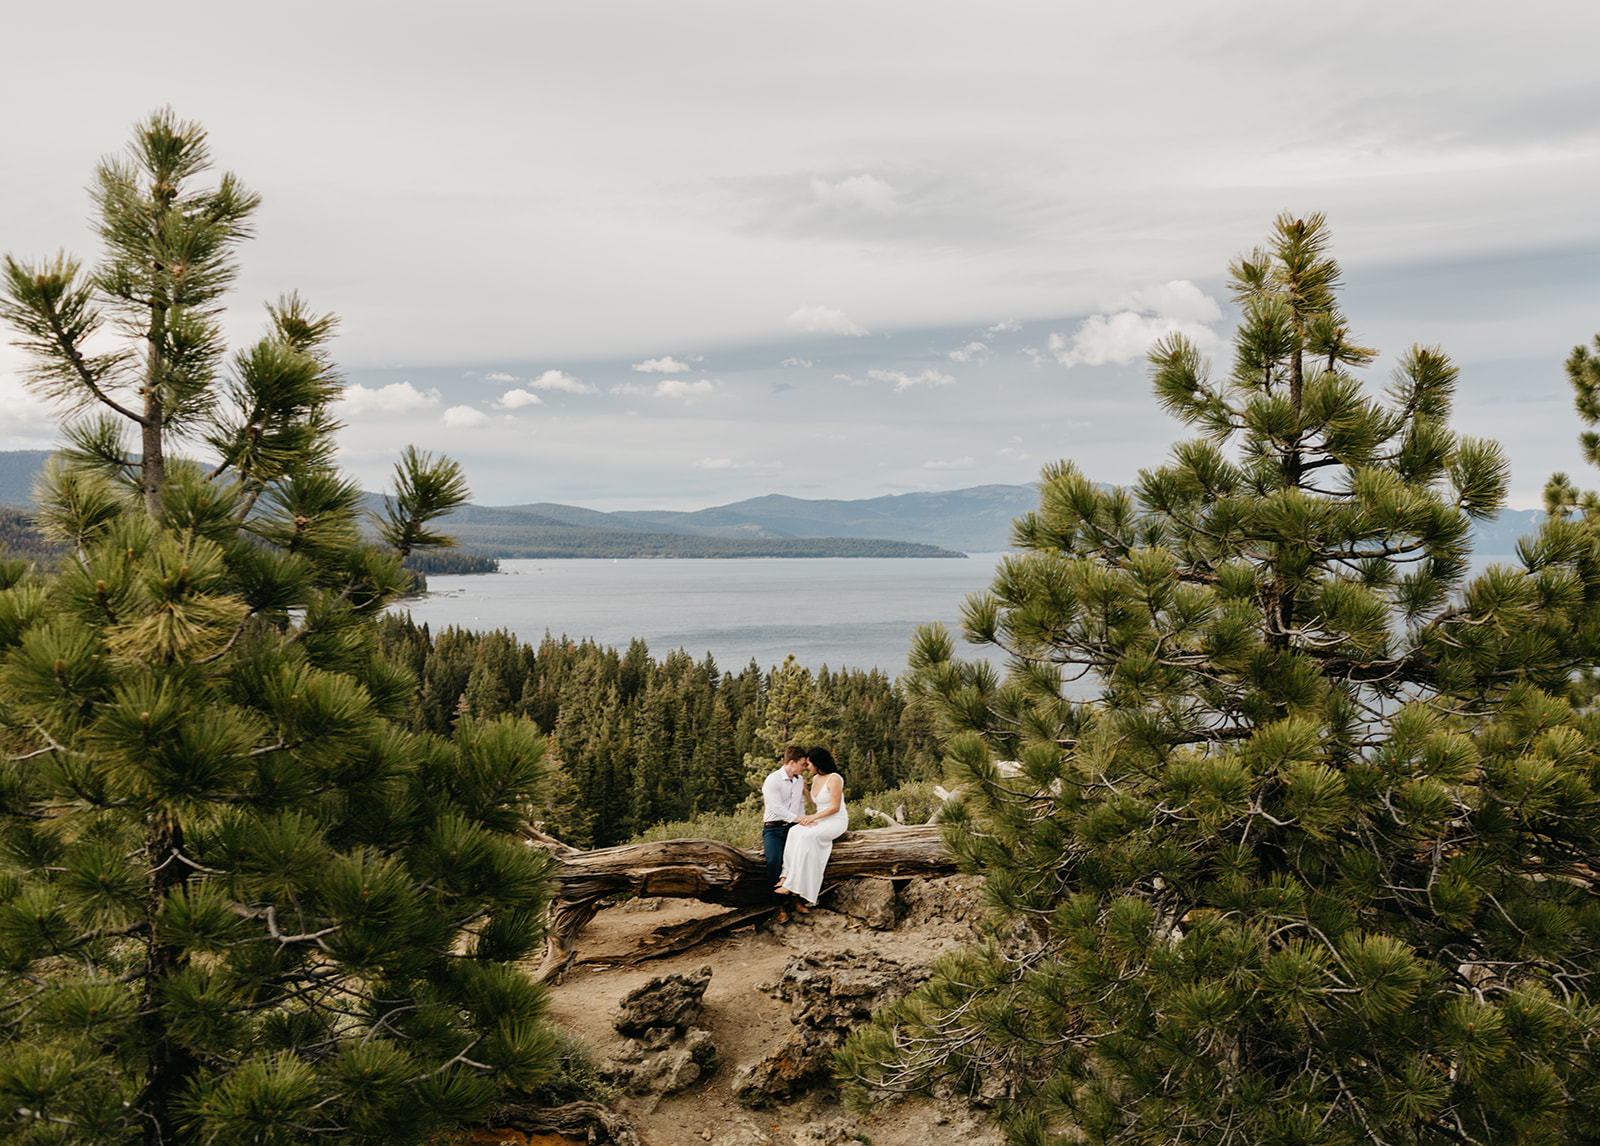 Check out this Lake Tahoe West Shore Engagement Session captured by Dani Rawson Photo, a Lake Tahoe-based wedding photographer.